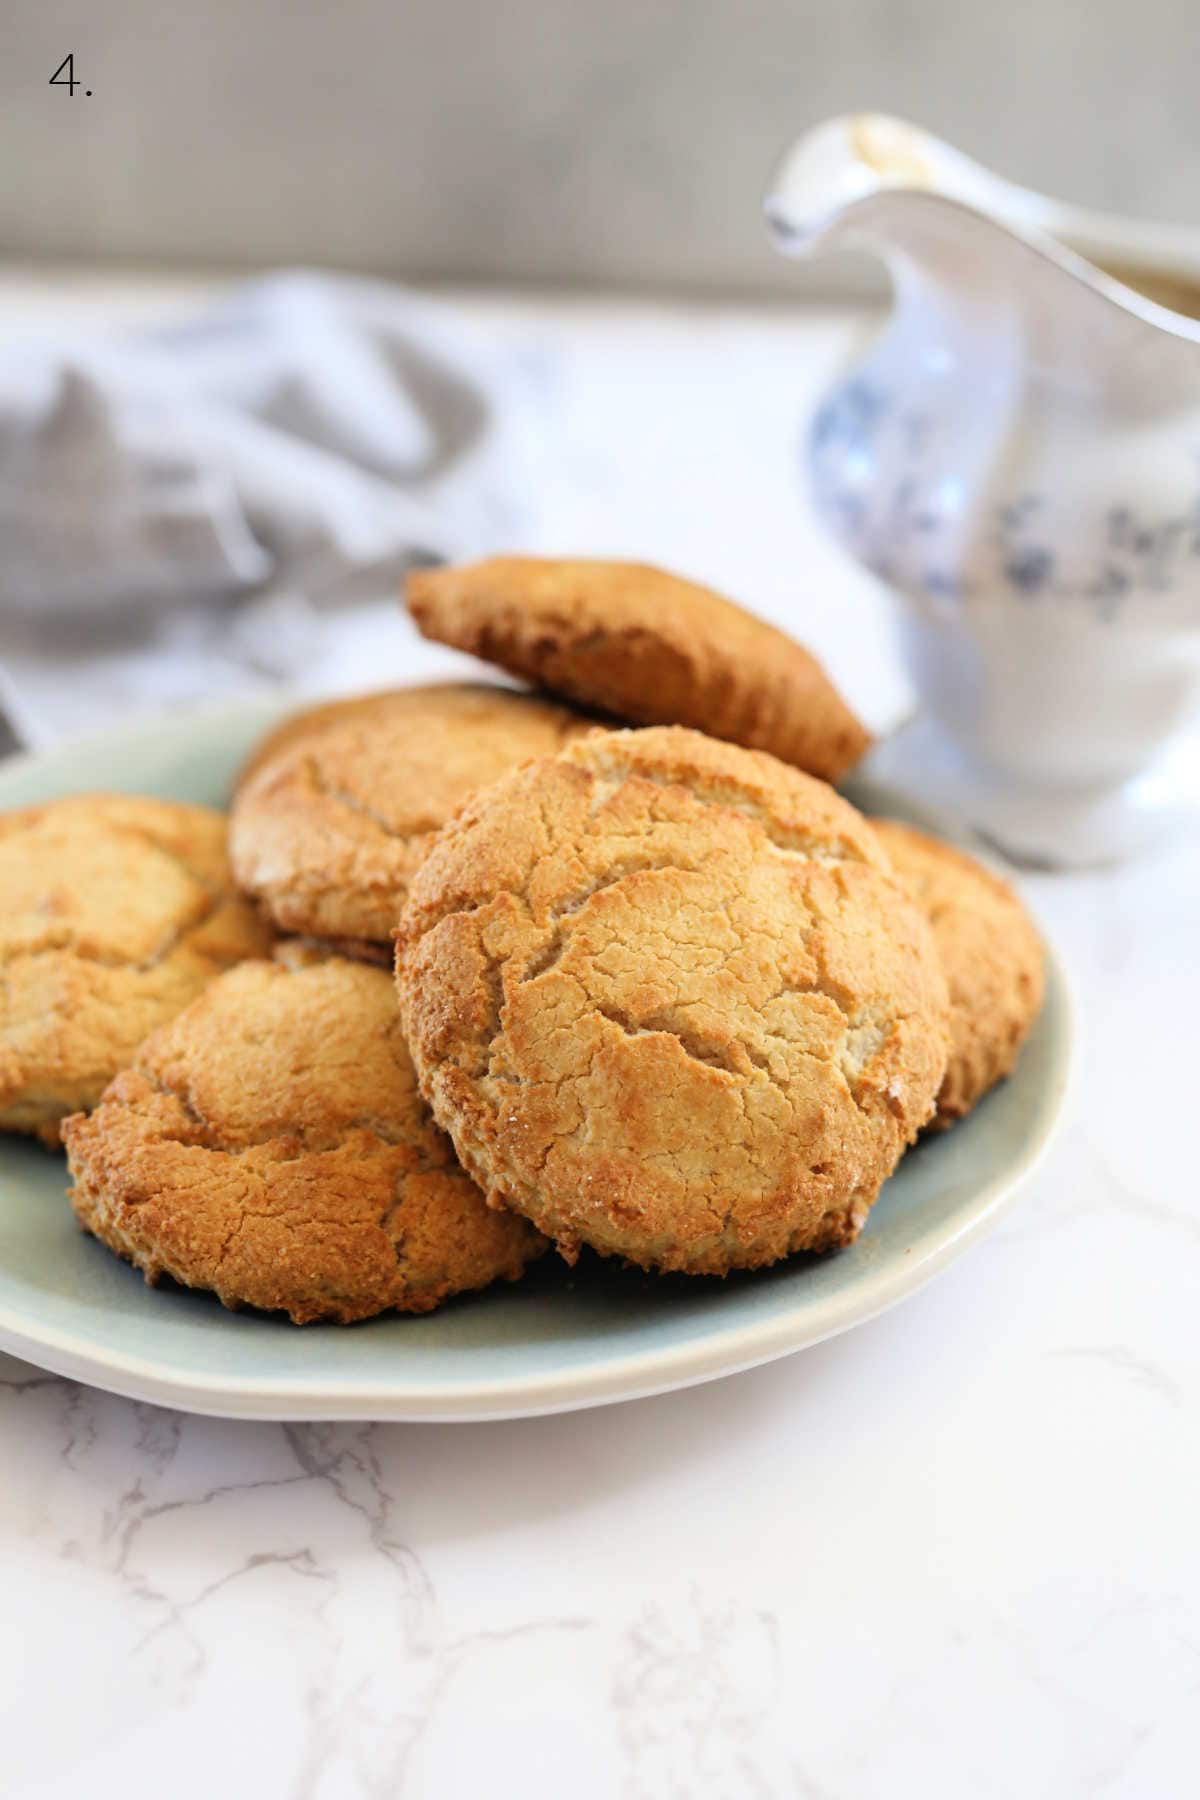 Dairy-free biscuits on a plate.